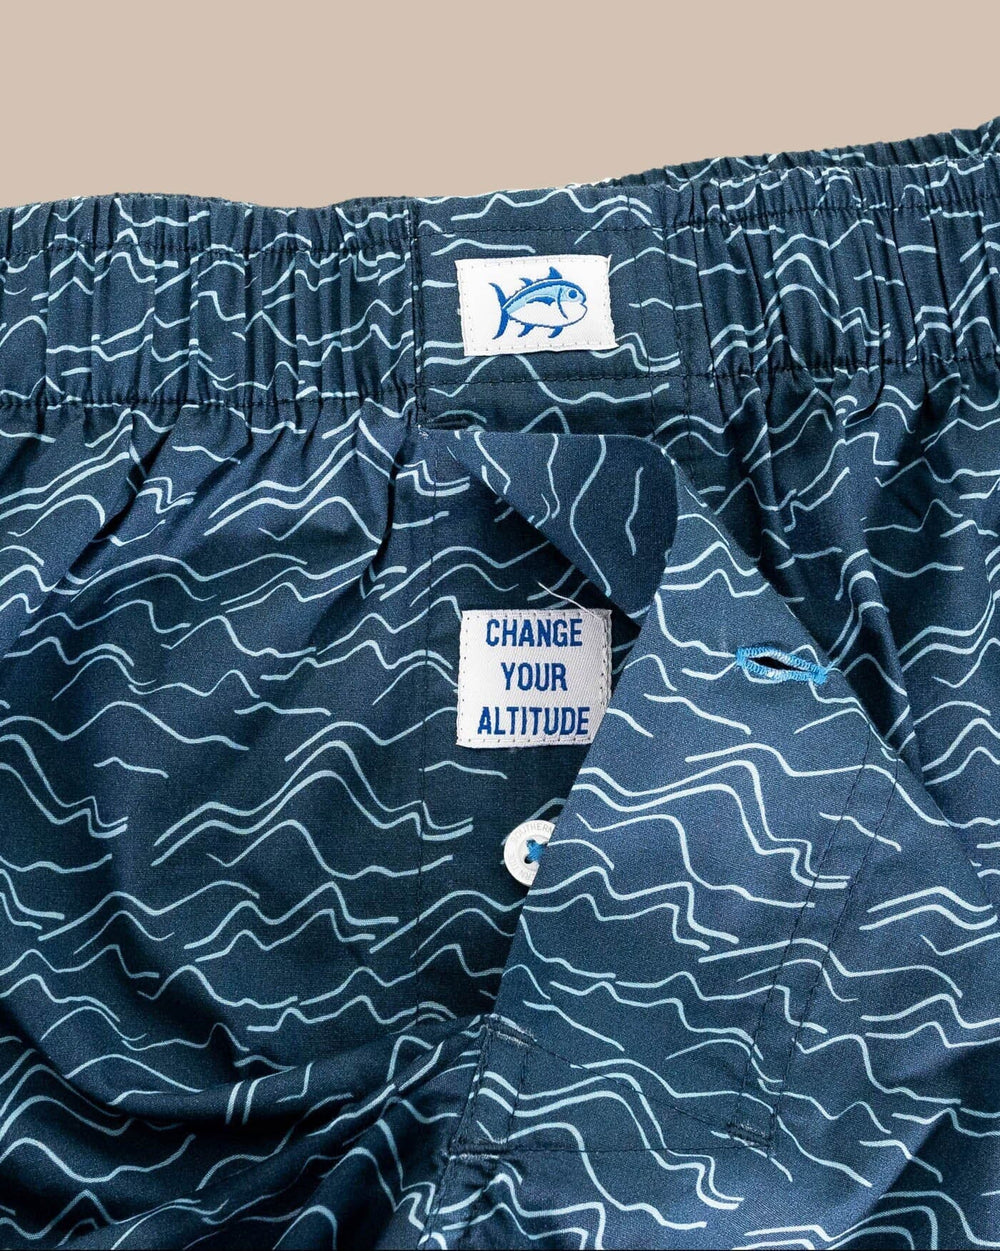 The detail view of the Southern Tide Change Your Altitude Printed Boxer by Southern Tide - Blue Haze